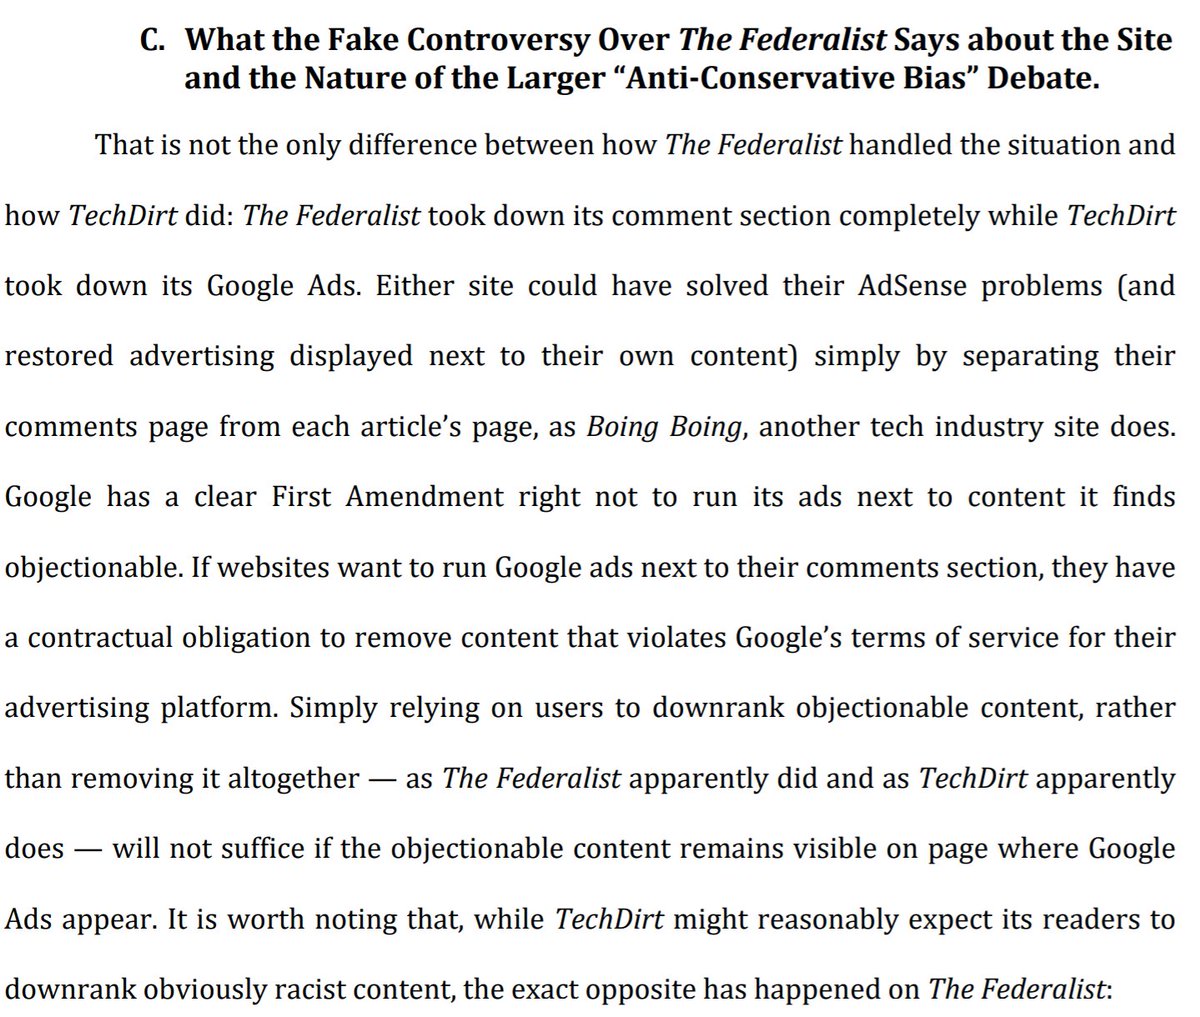 We debunked the fake controversy over the Federalist being "censored" in our reply comments on NTIA's petition  https://techfreedom.org/wp-content/uploads/2020/09/NTIA-230-Petition-Reply-Comments-9.17.2020.pdf#page-230